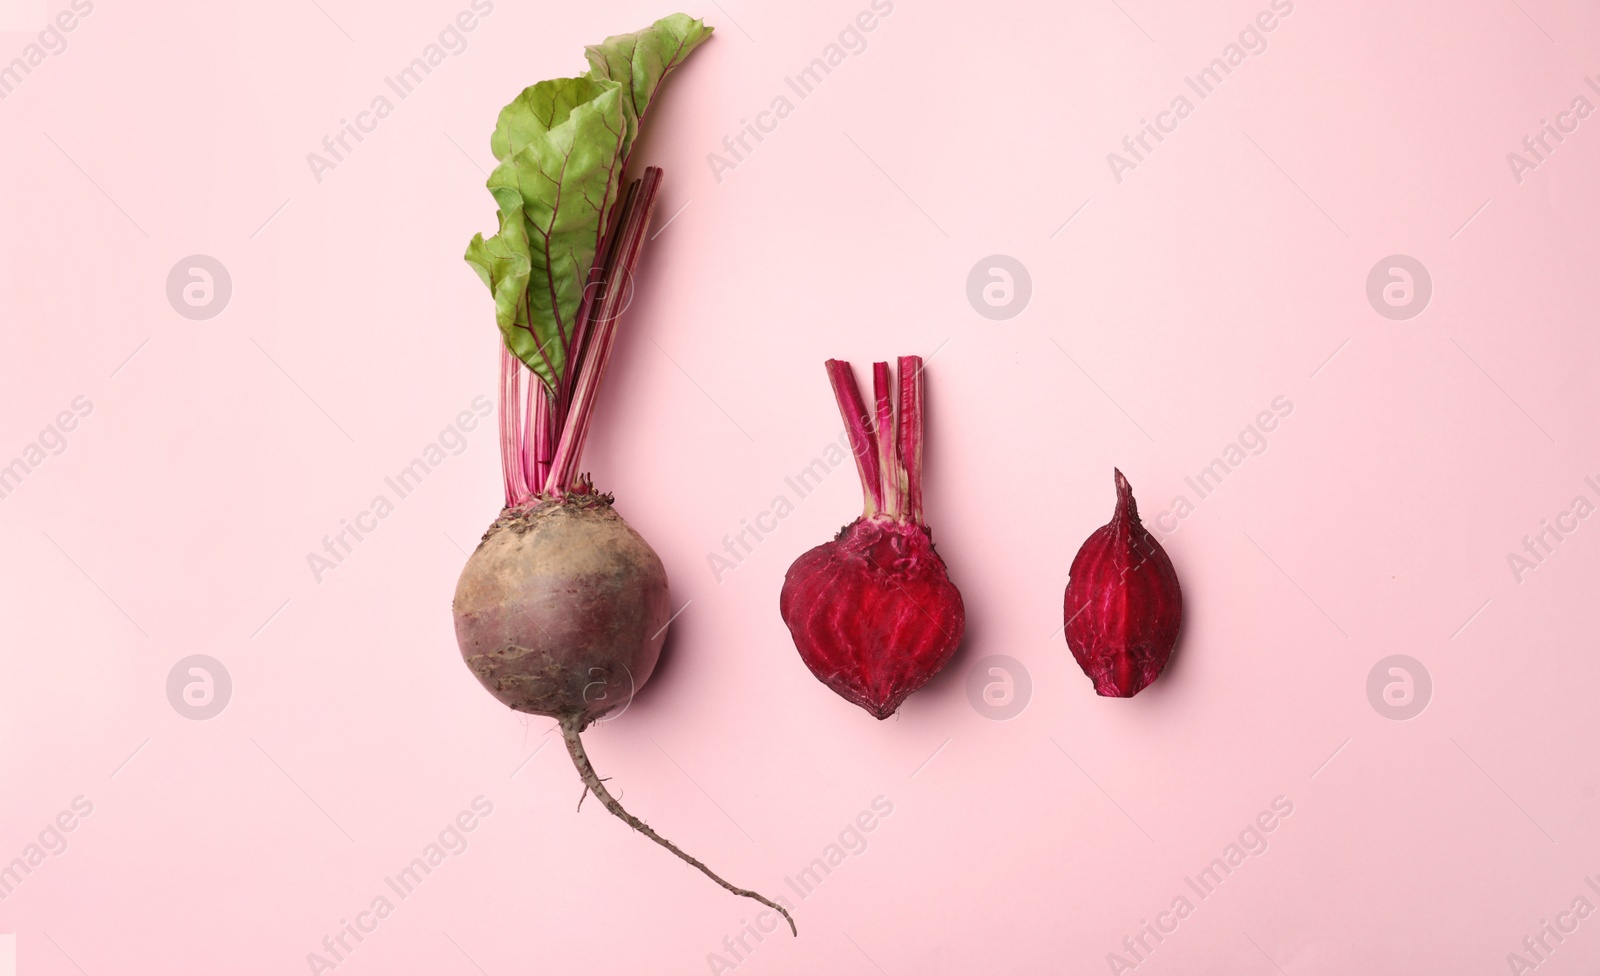 Photo of Whole and cut fresh red beets on pink background, flat lay